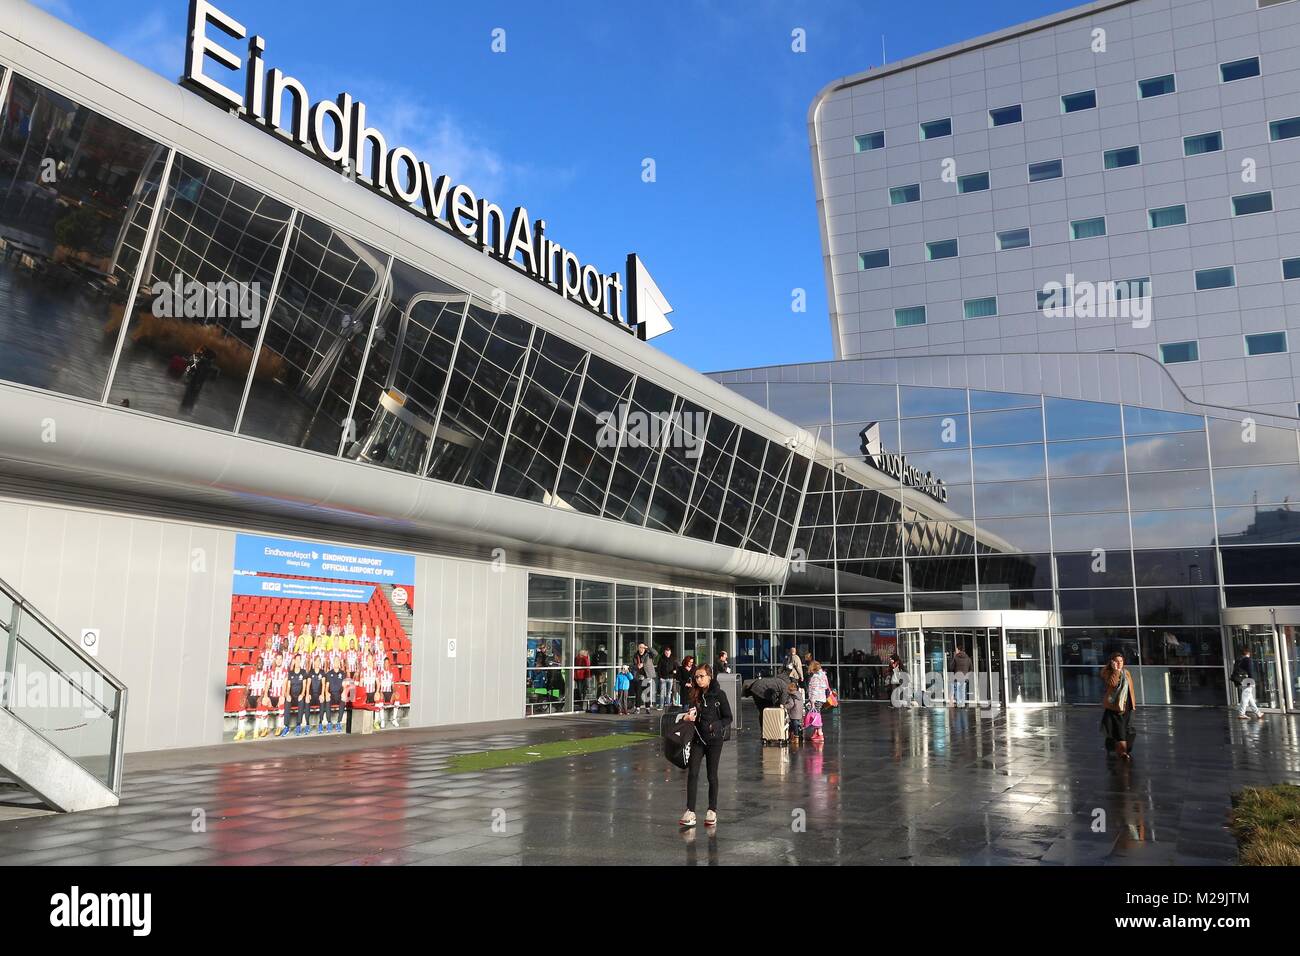 EINDHOVEN, NETHERLANDS - NOVEMBER 19, 2016: People exit Eindhoven Airport in the Netherlands. It is the 2nd largest airport in the Netherlands, with 4 Stock Photo